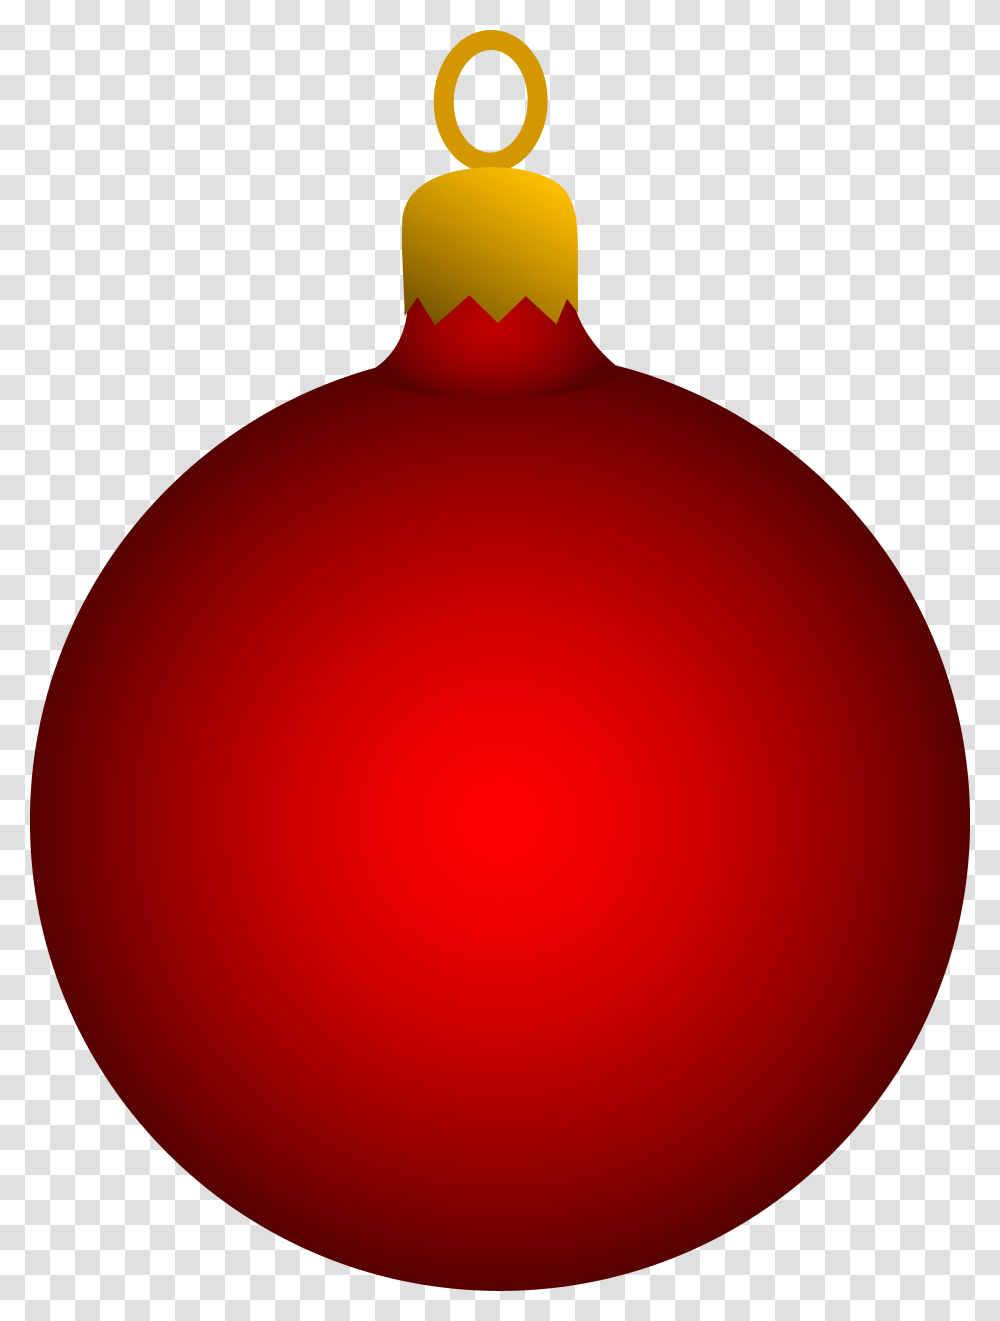 Artificial Christmas Trees Christmas Ornaments, Balloon, Snowman, Winter, Outdoors Transparent Png